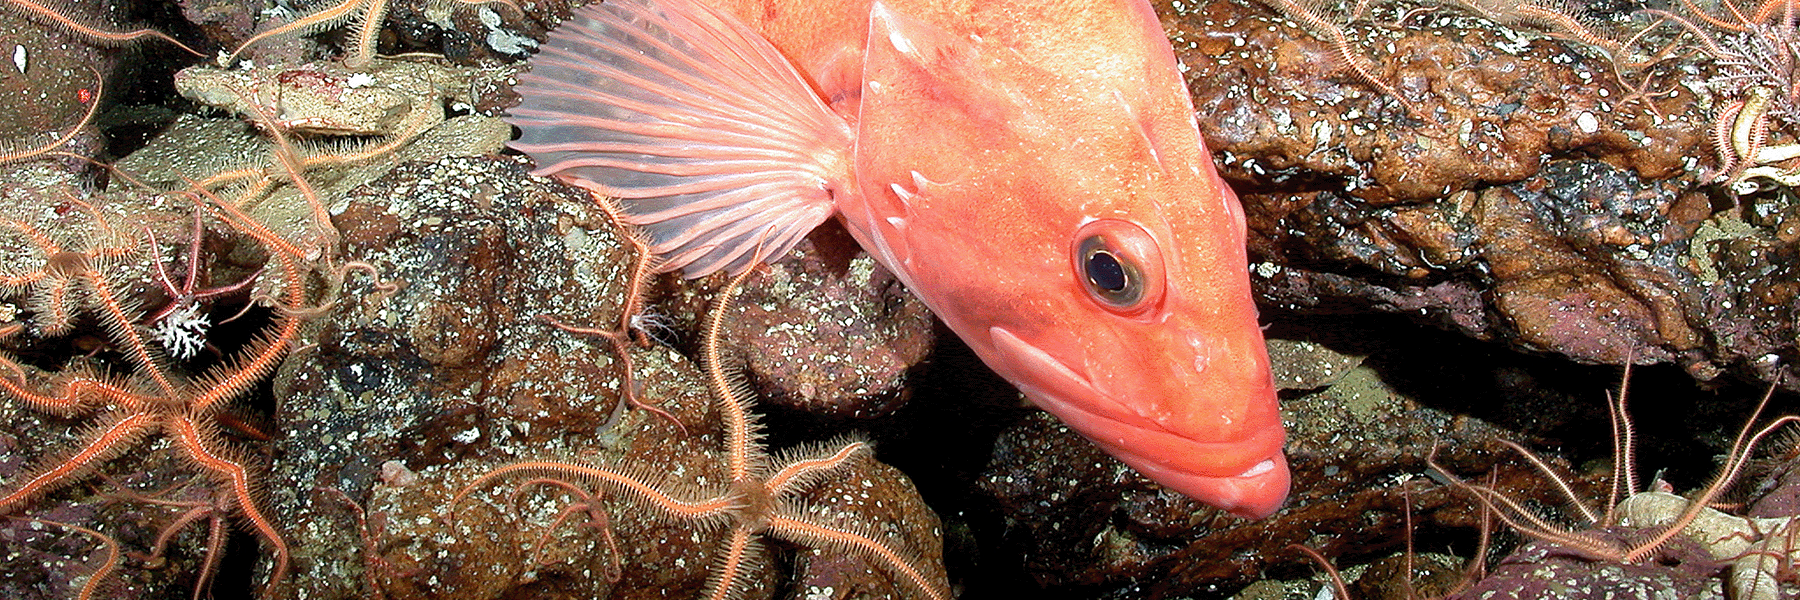 A Cowcod rockfish among rocks and Brittle Stars